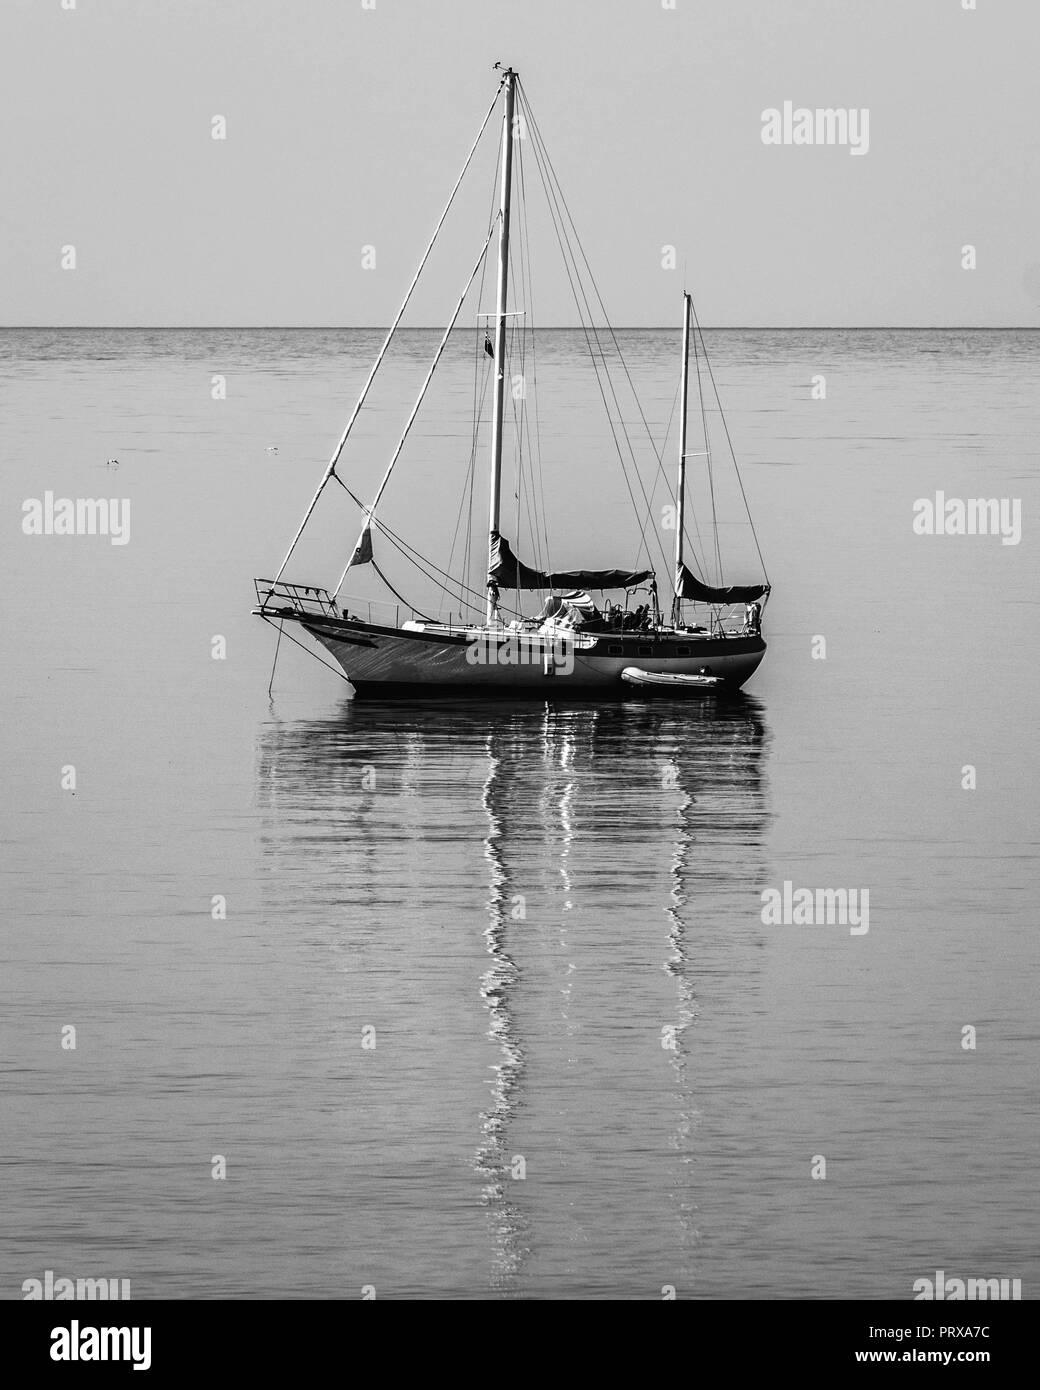 Sailing boat Black and White Stock Photos & Images - Alamy